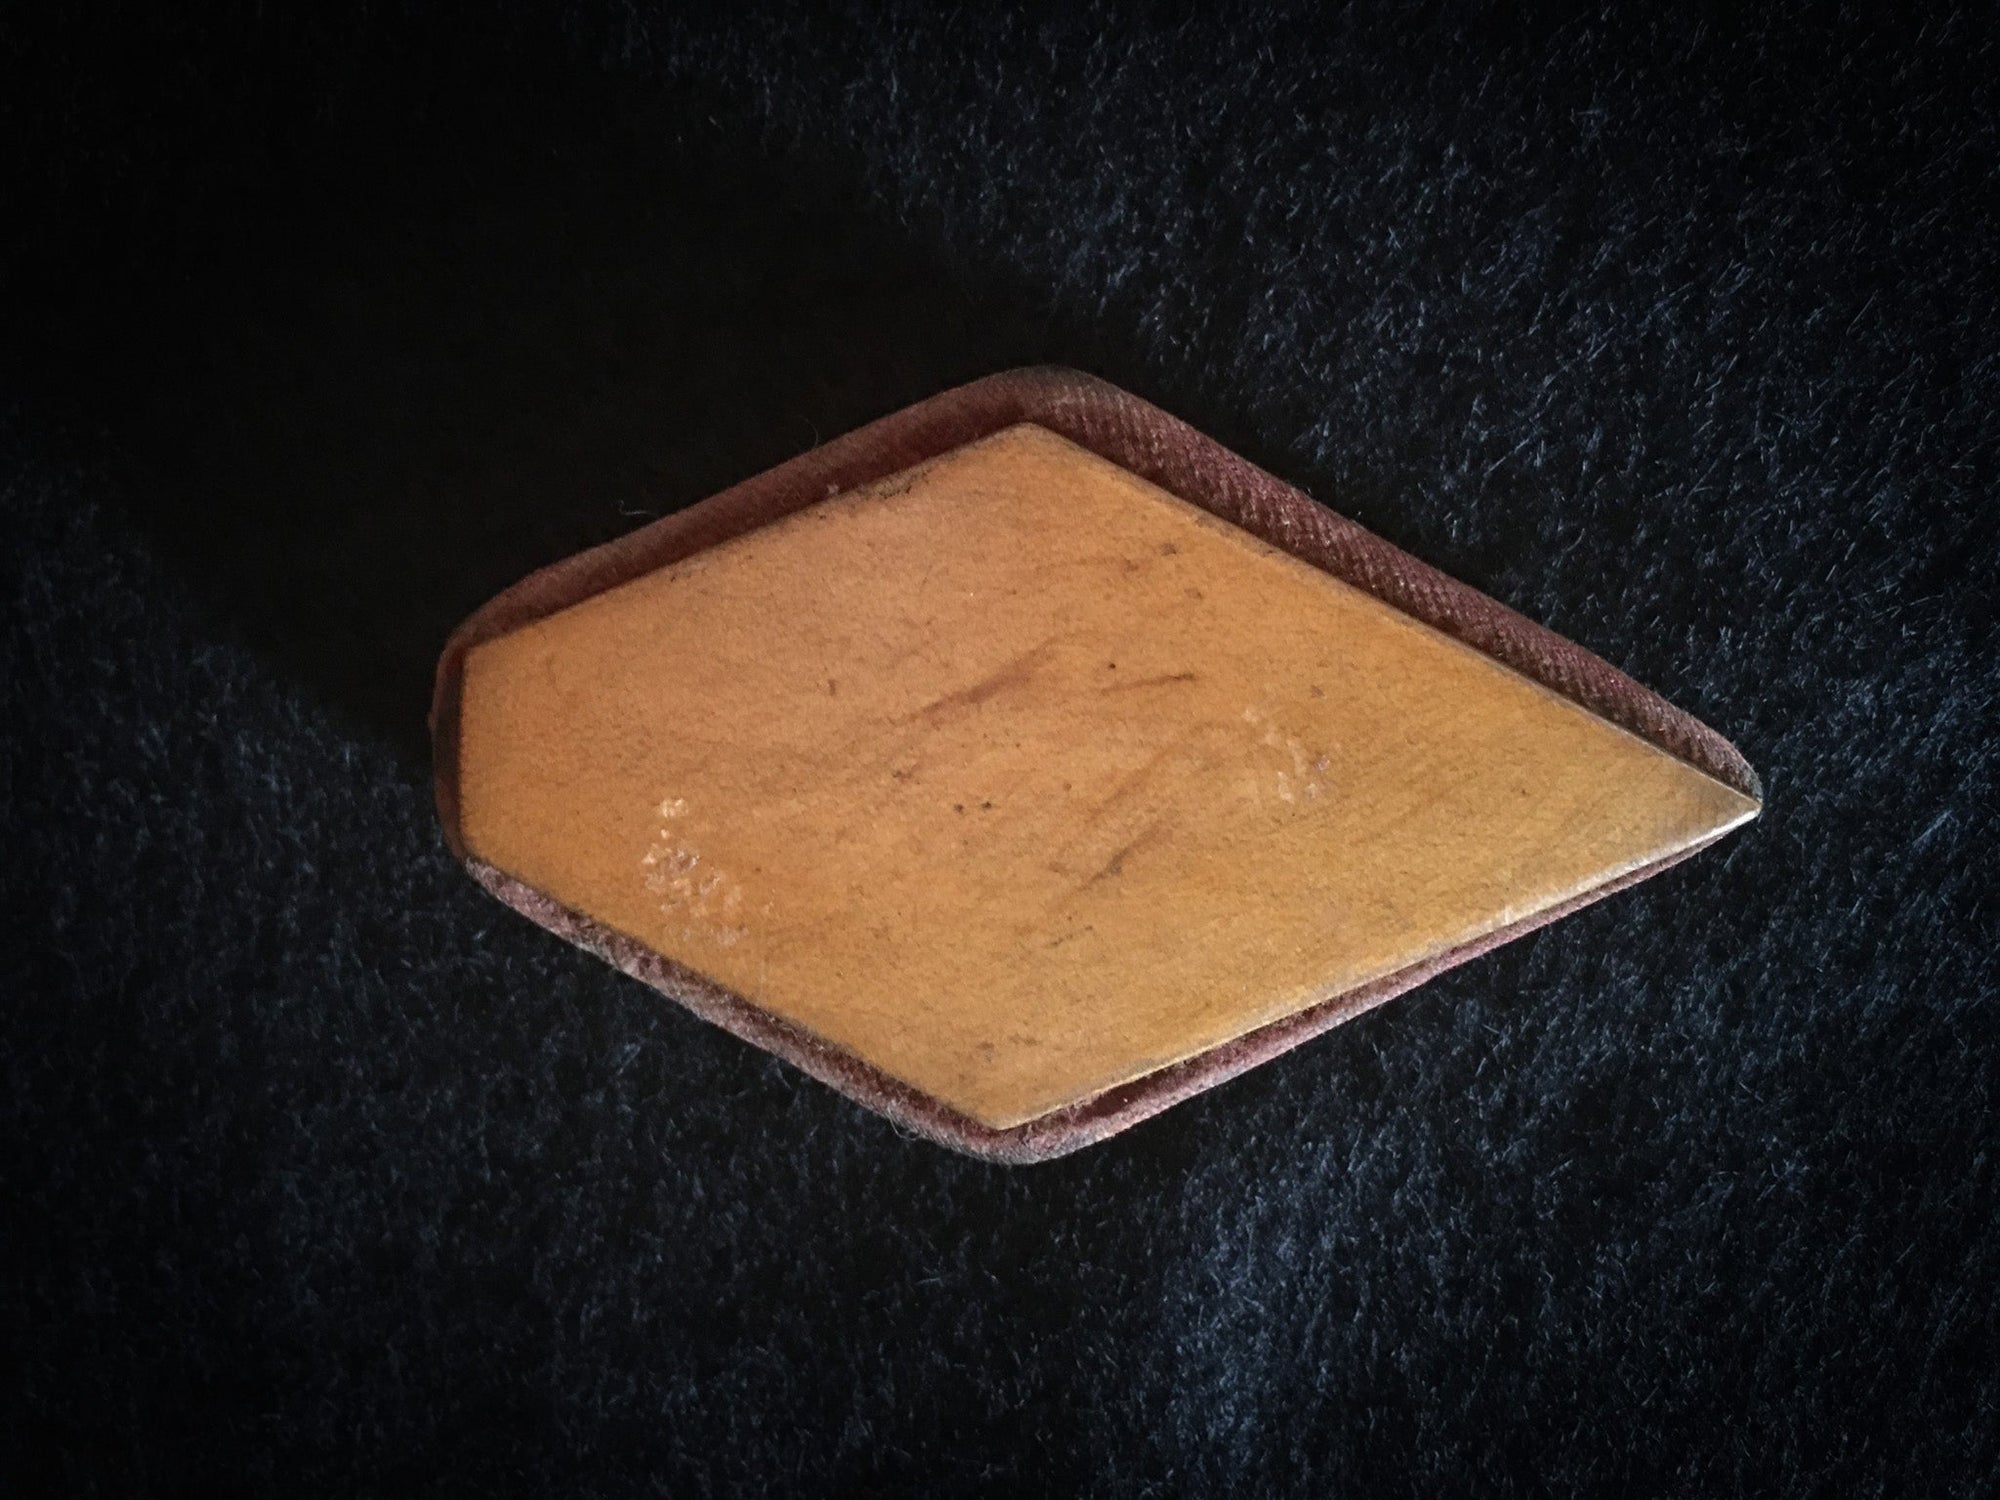 1880’s – 1910’s Mauchline Ware Diamond Shaped Pin Disk and Sewing Egg